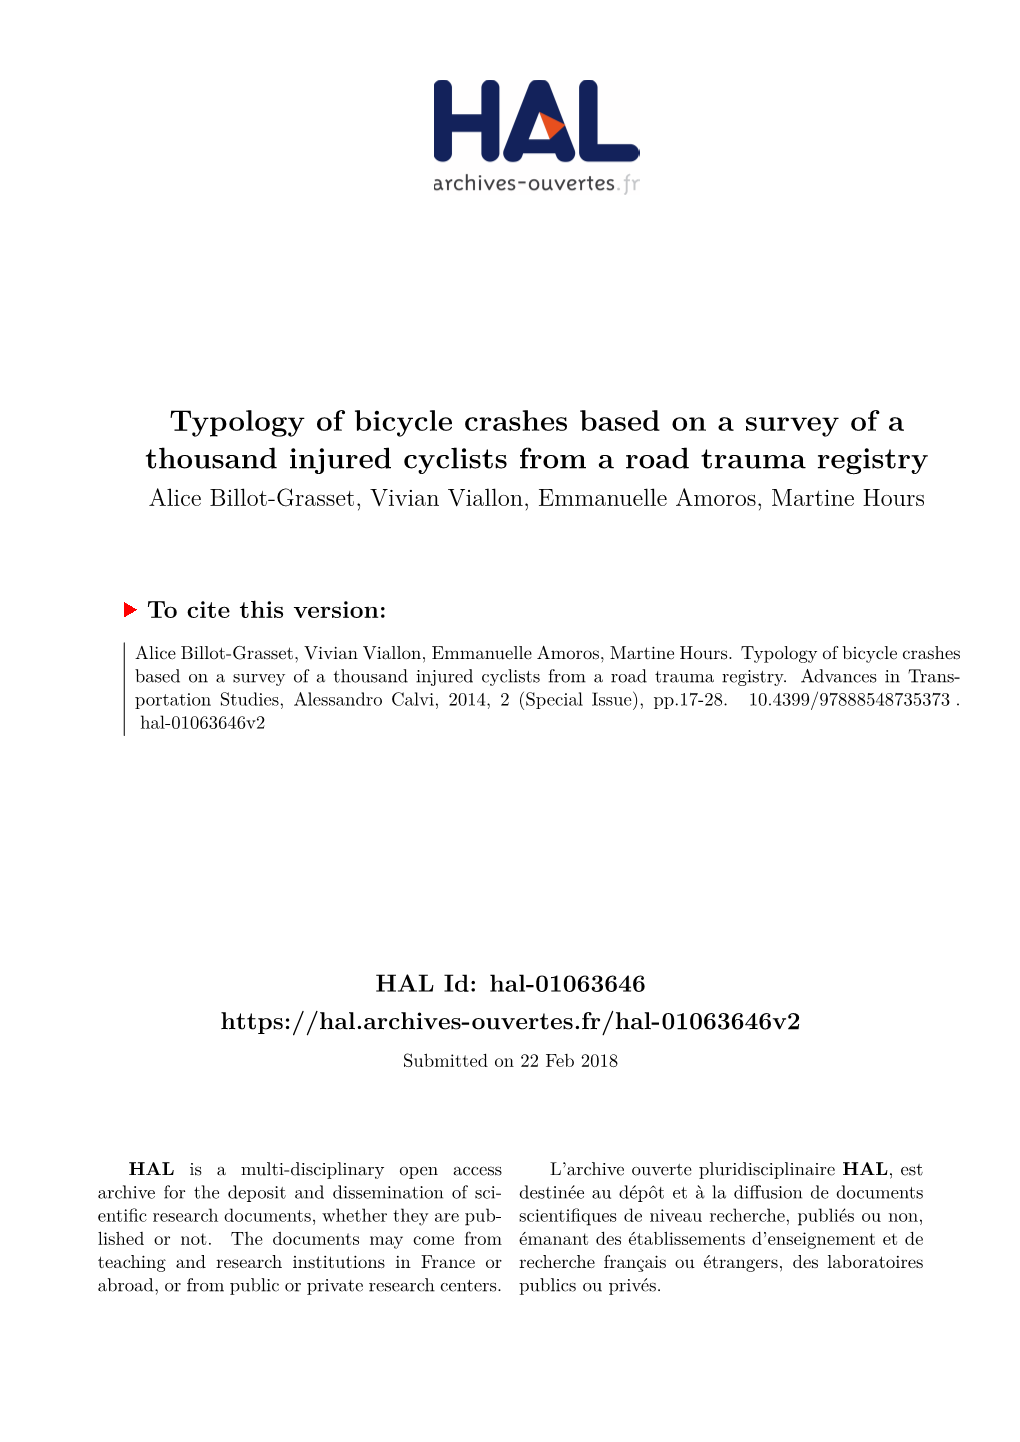 Typology of Bicycle Crashes Based on a Survey of A